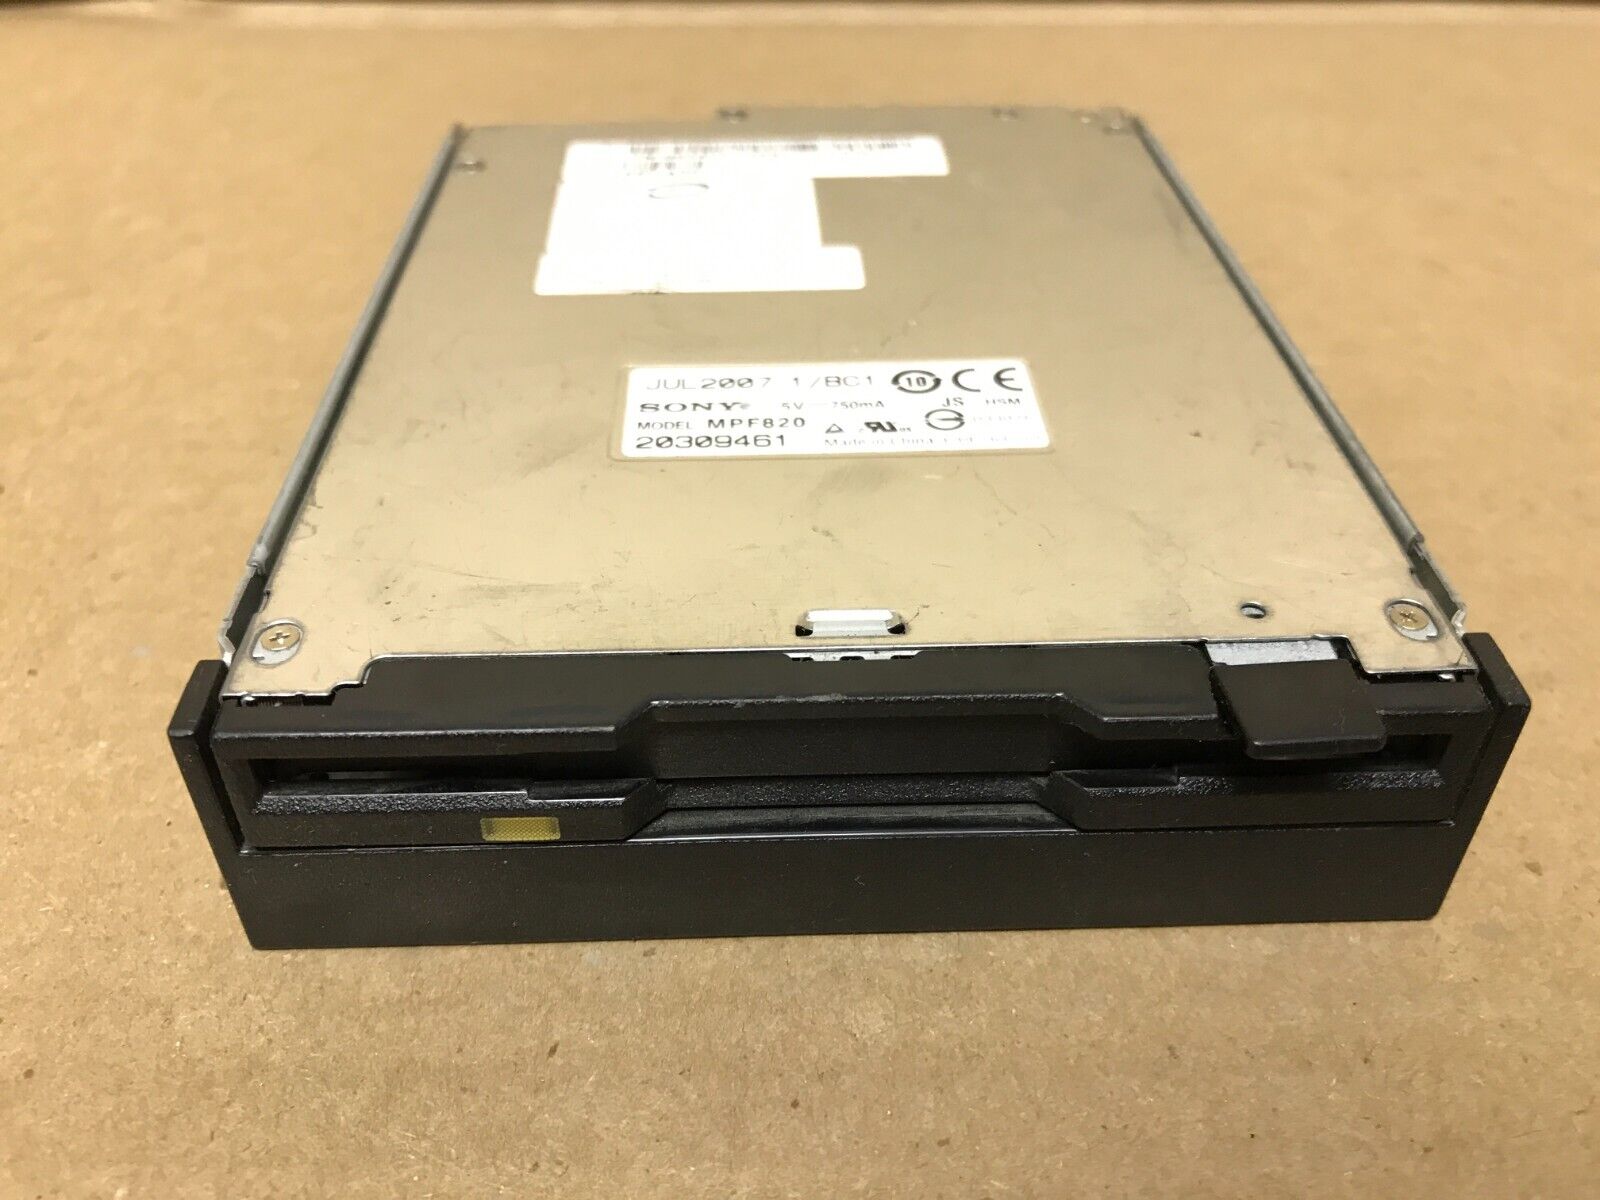 Sony MPF820 Floppy Disk Drive 0P9566 1.44MB 3.5